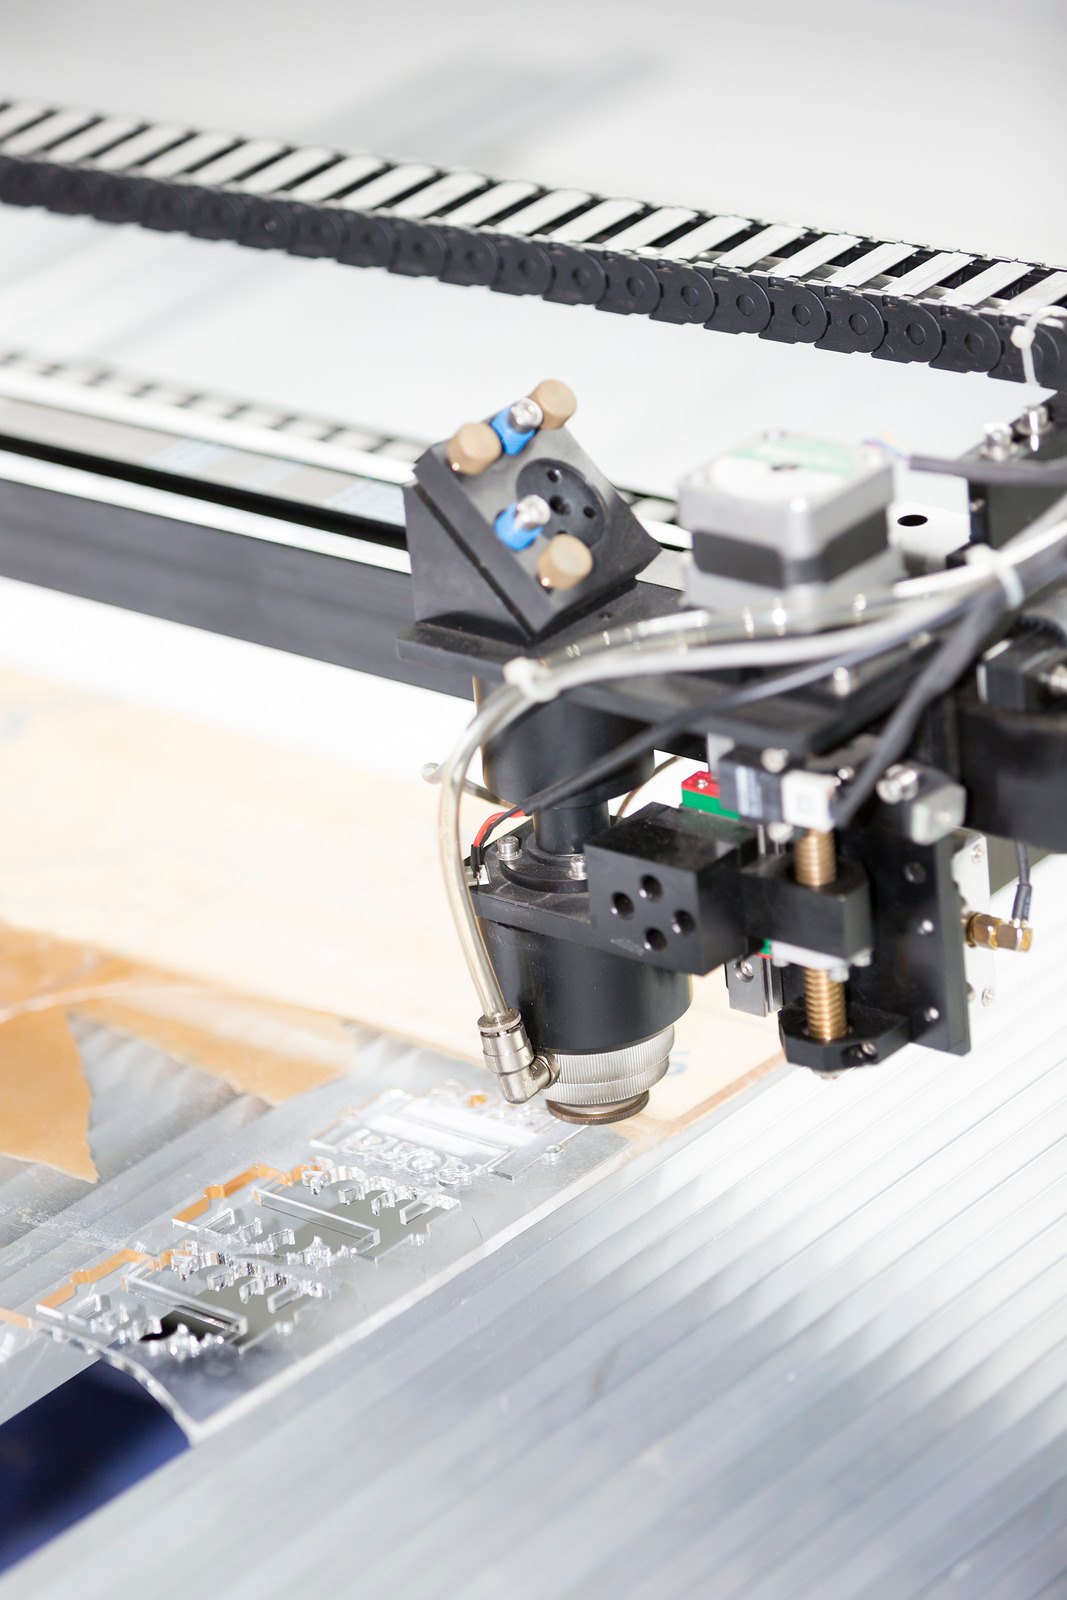 Evaluating the Pros and Cons of Laser Cutting for Cost-Effectiveness